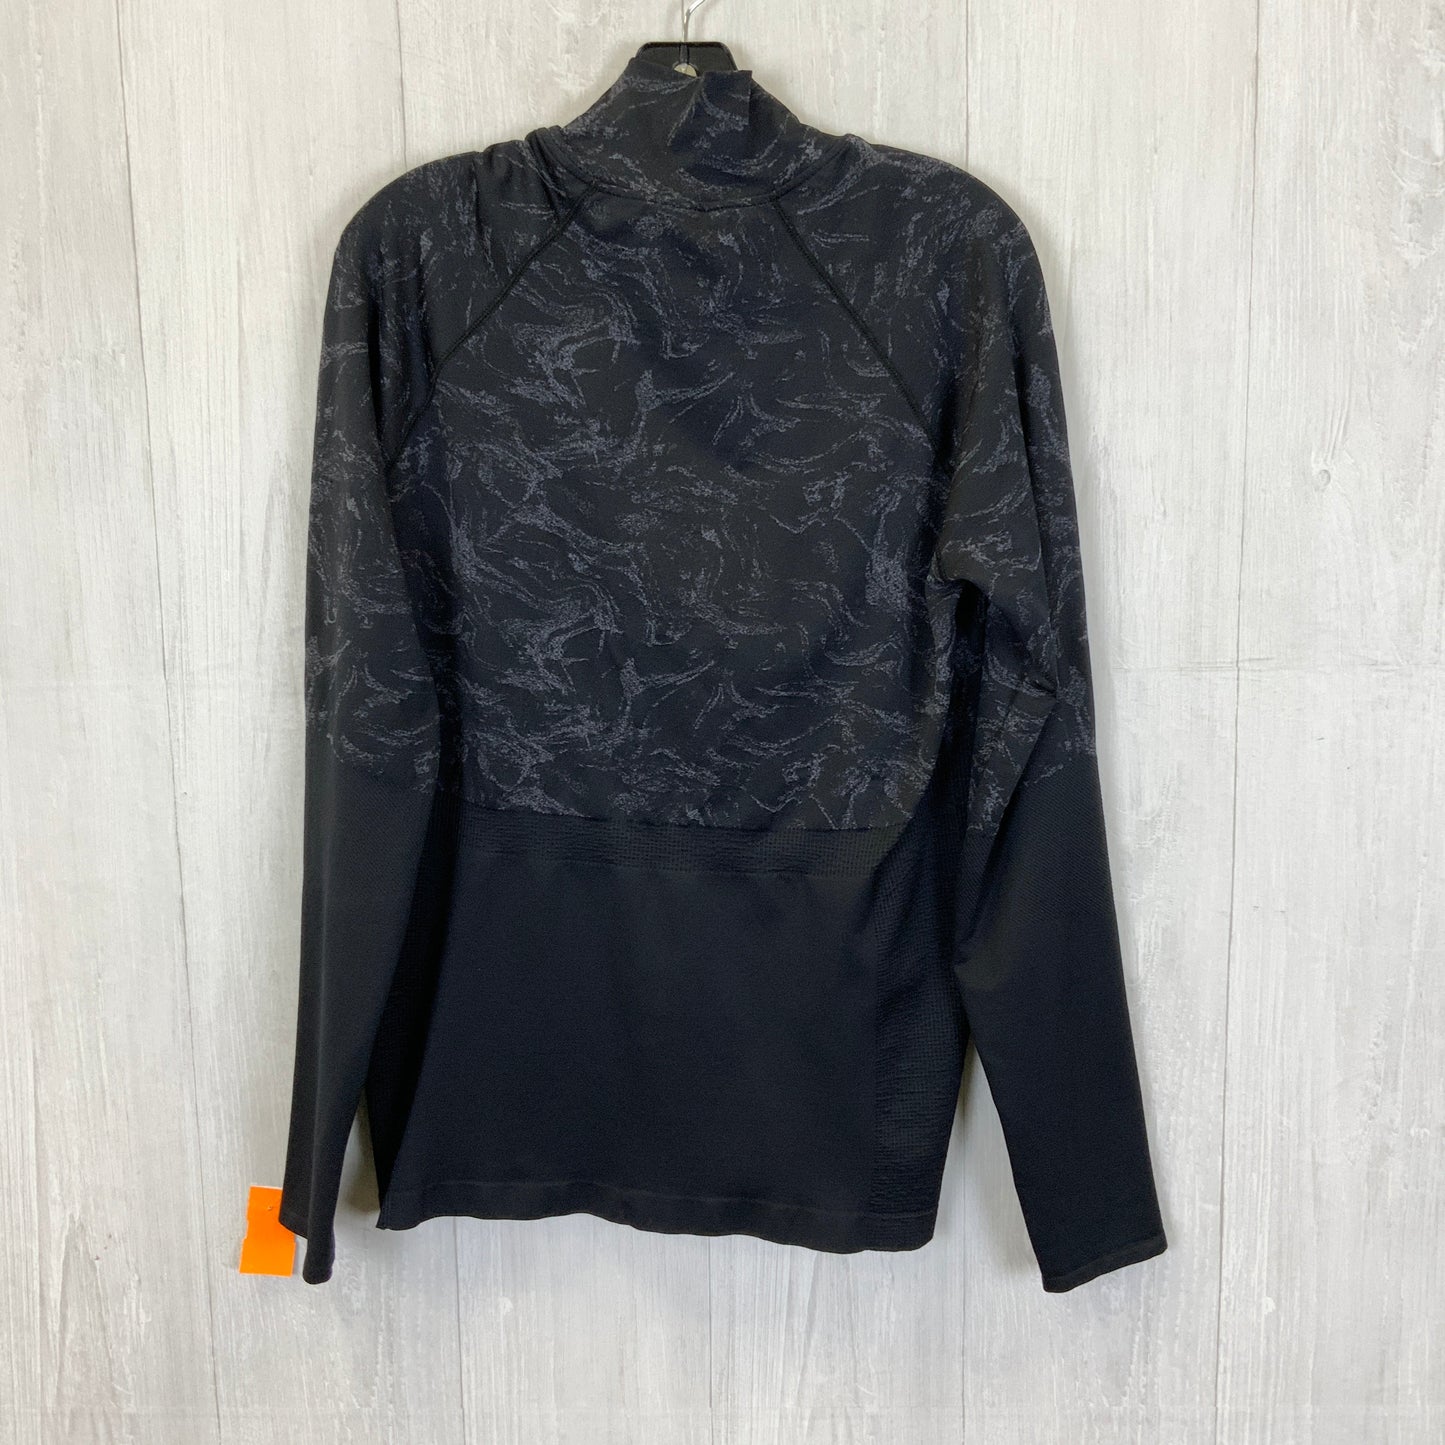 Charcoal Athletic Top Long Sleeve Collar Fabletics, Size Xl